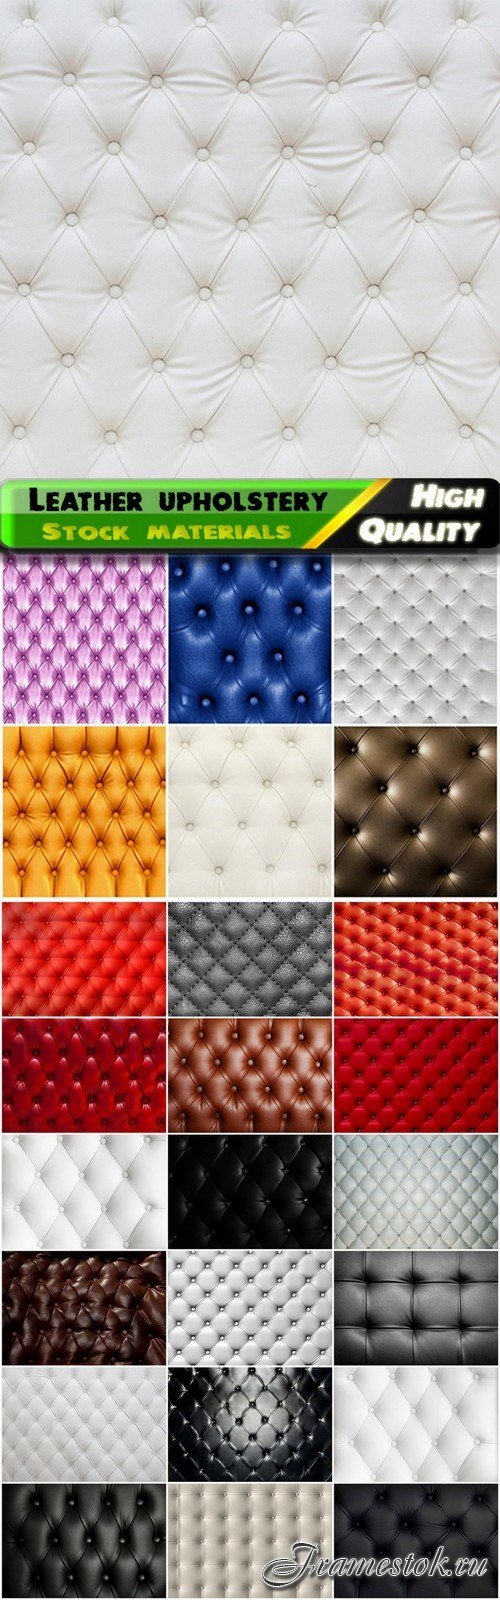 Textures of luxury furniture leather upholstery - 25 HQ Jpg